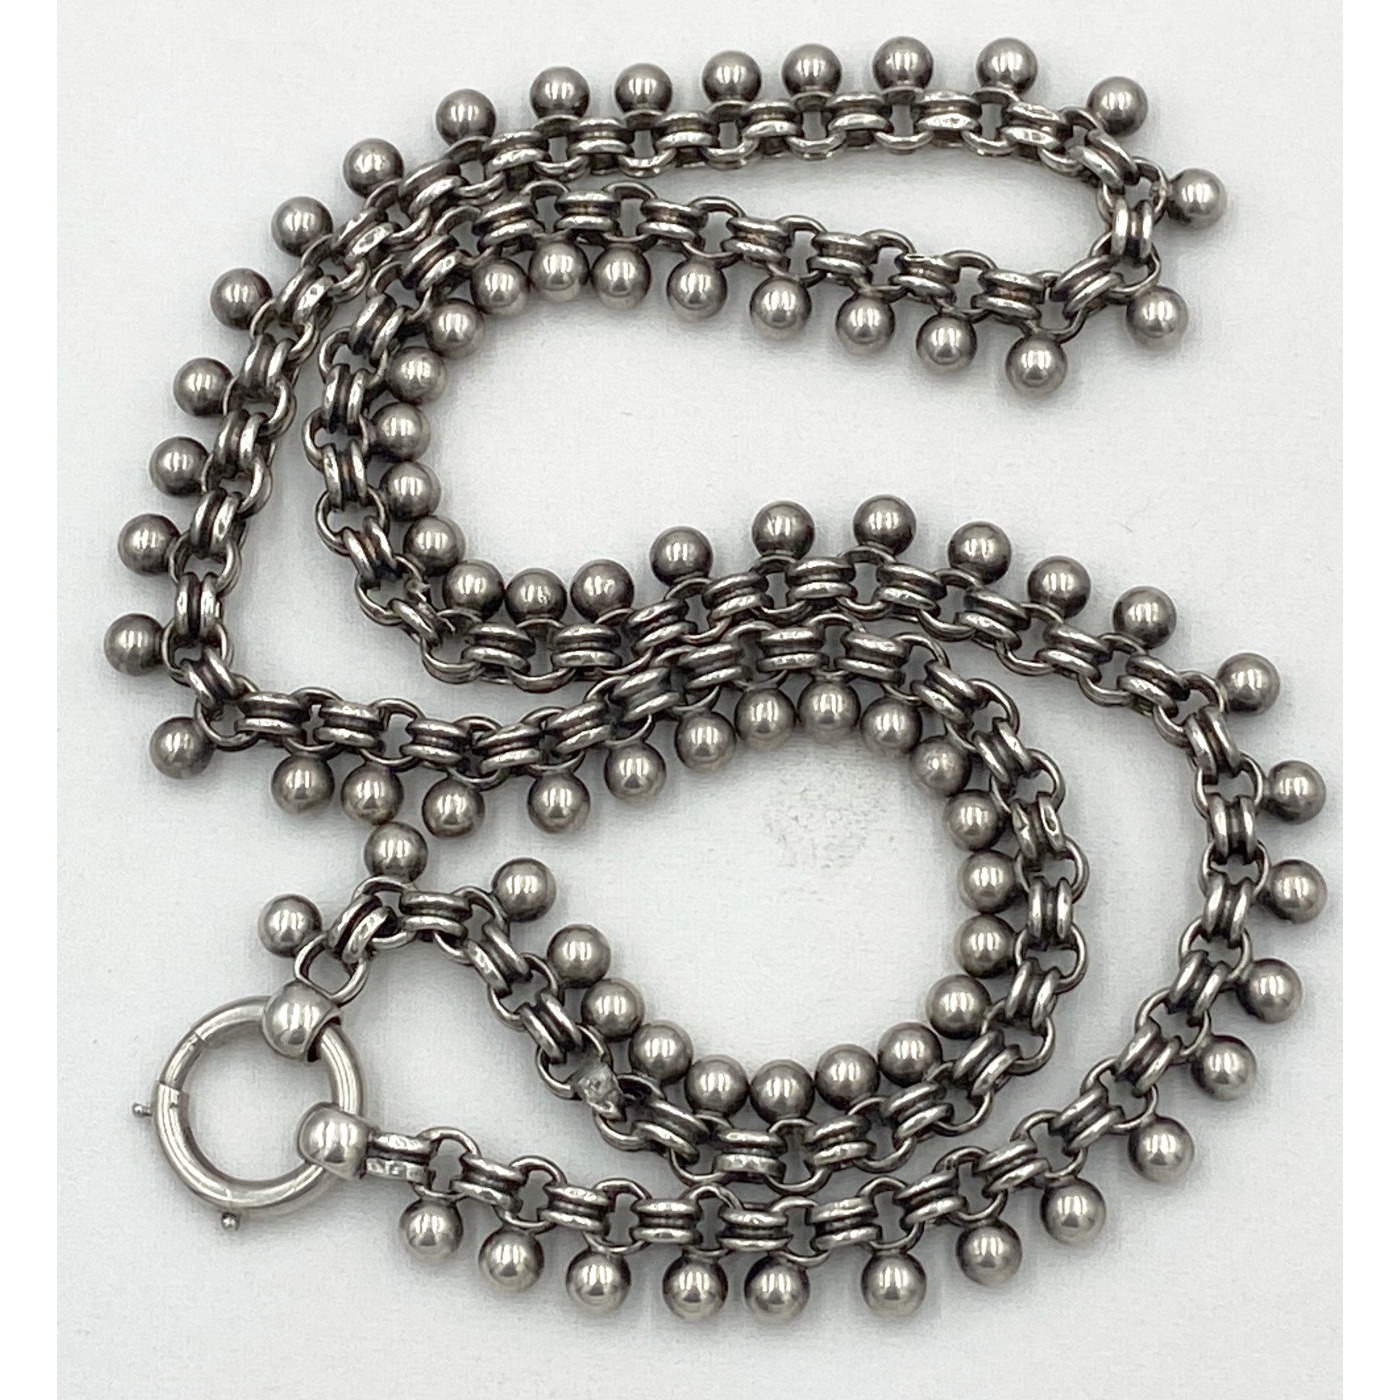 20" Uncommonly Long Cannonball Antique English Silver Chain - Chain Only